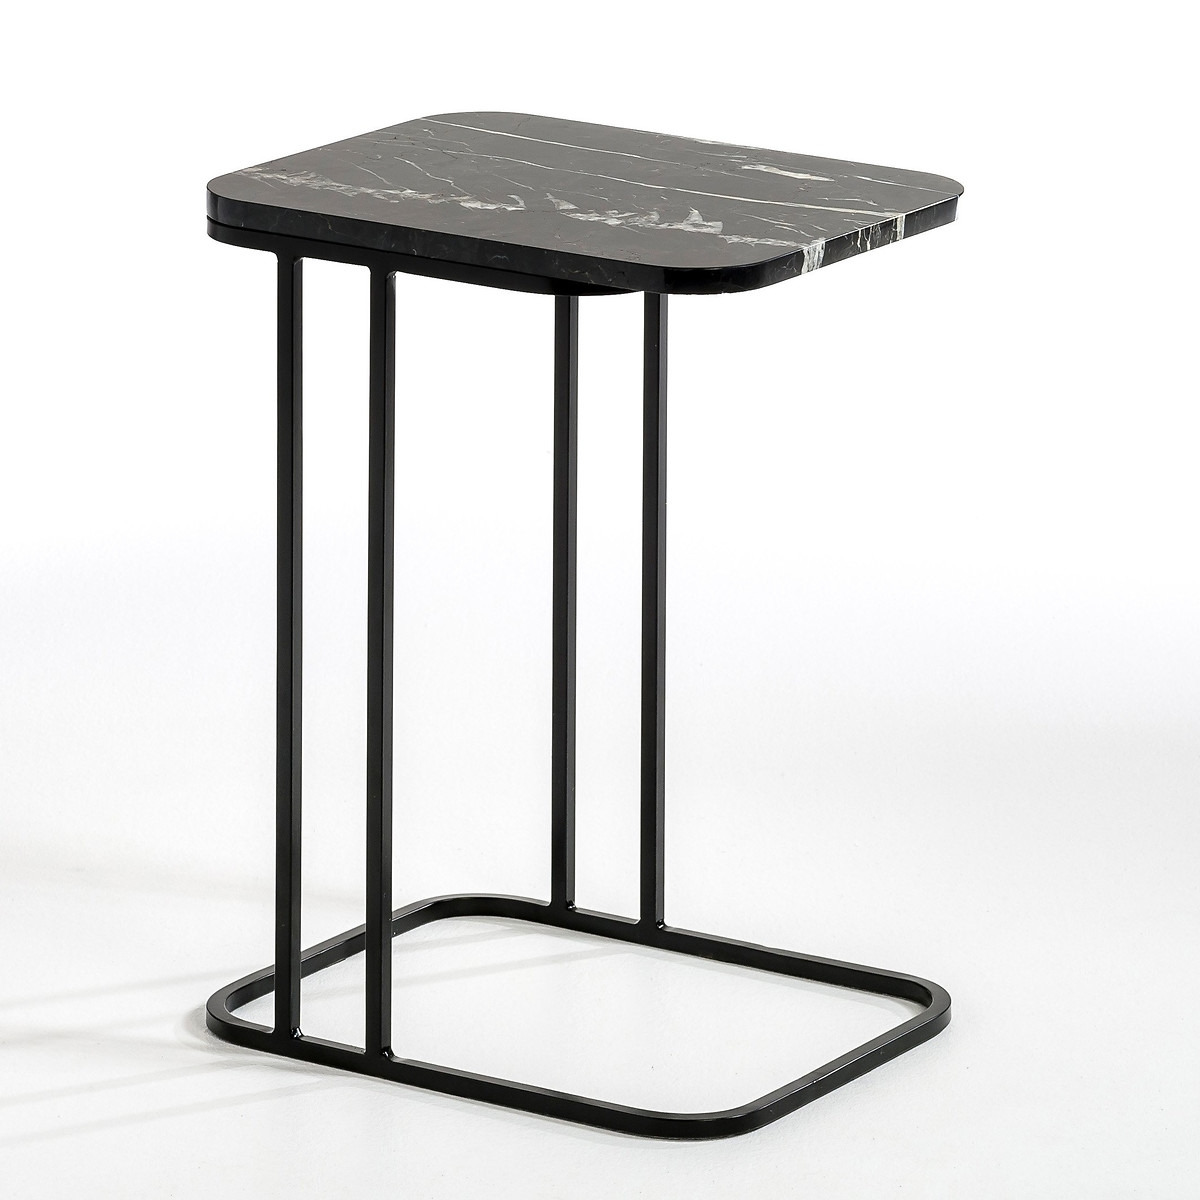 Trebor Metal & Marble Side Table by E.Gallina - image 1